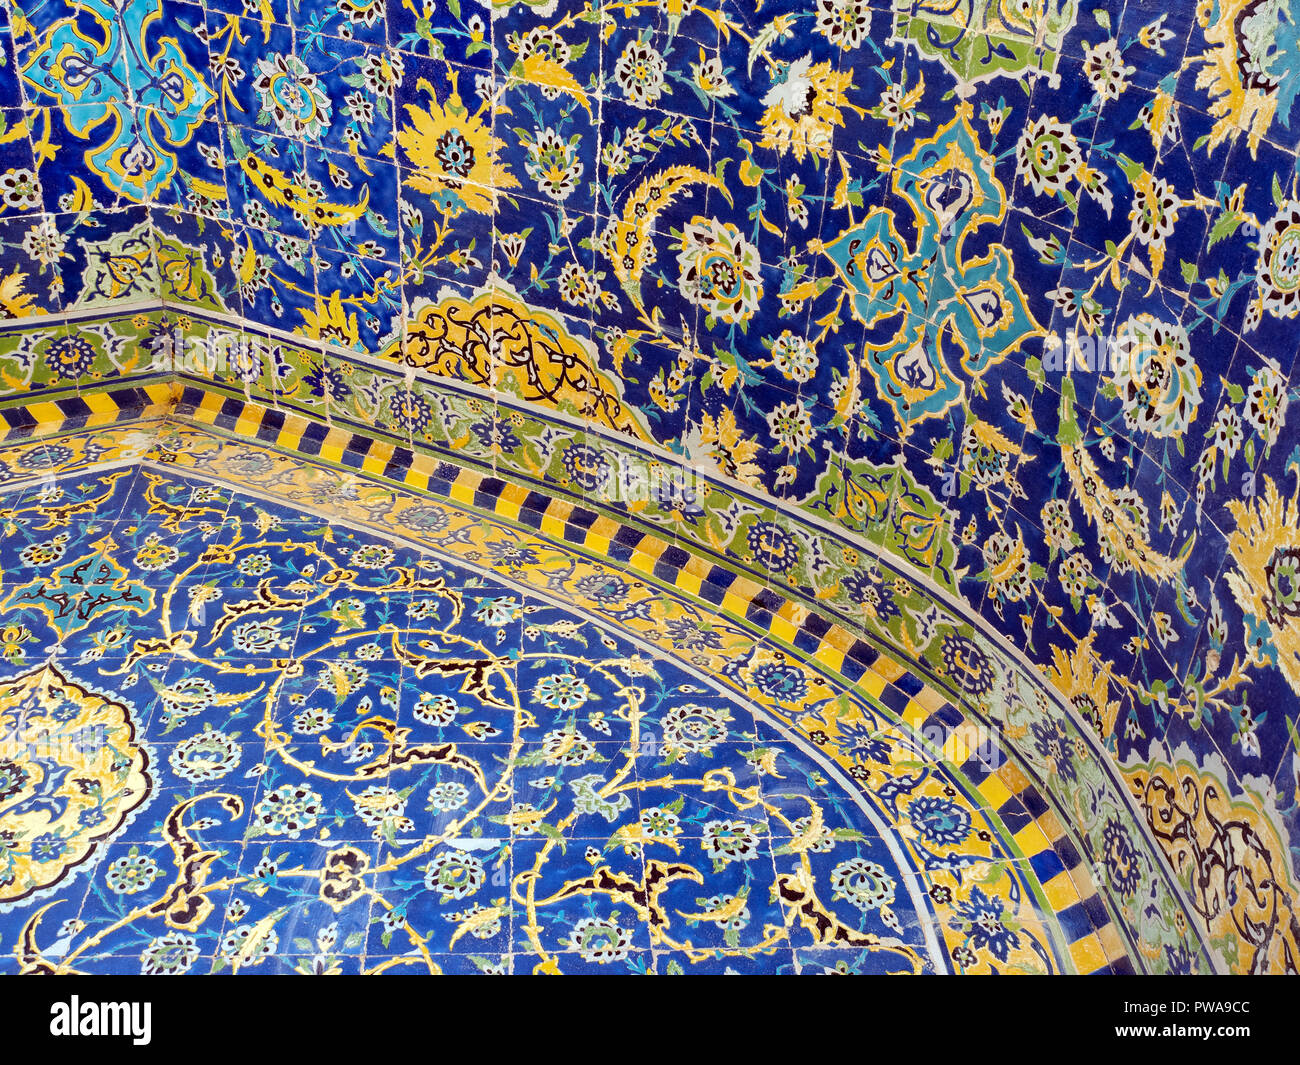 Polychrome tile decoration in Shah mosque, Isfahan, Iran Stock Photo